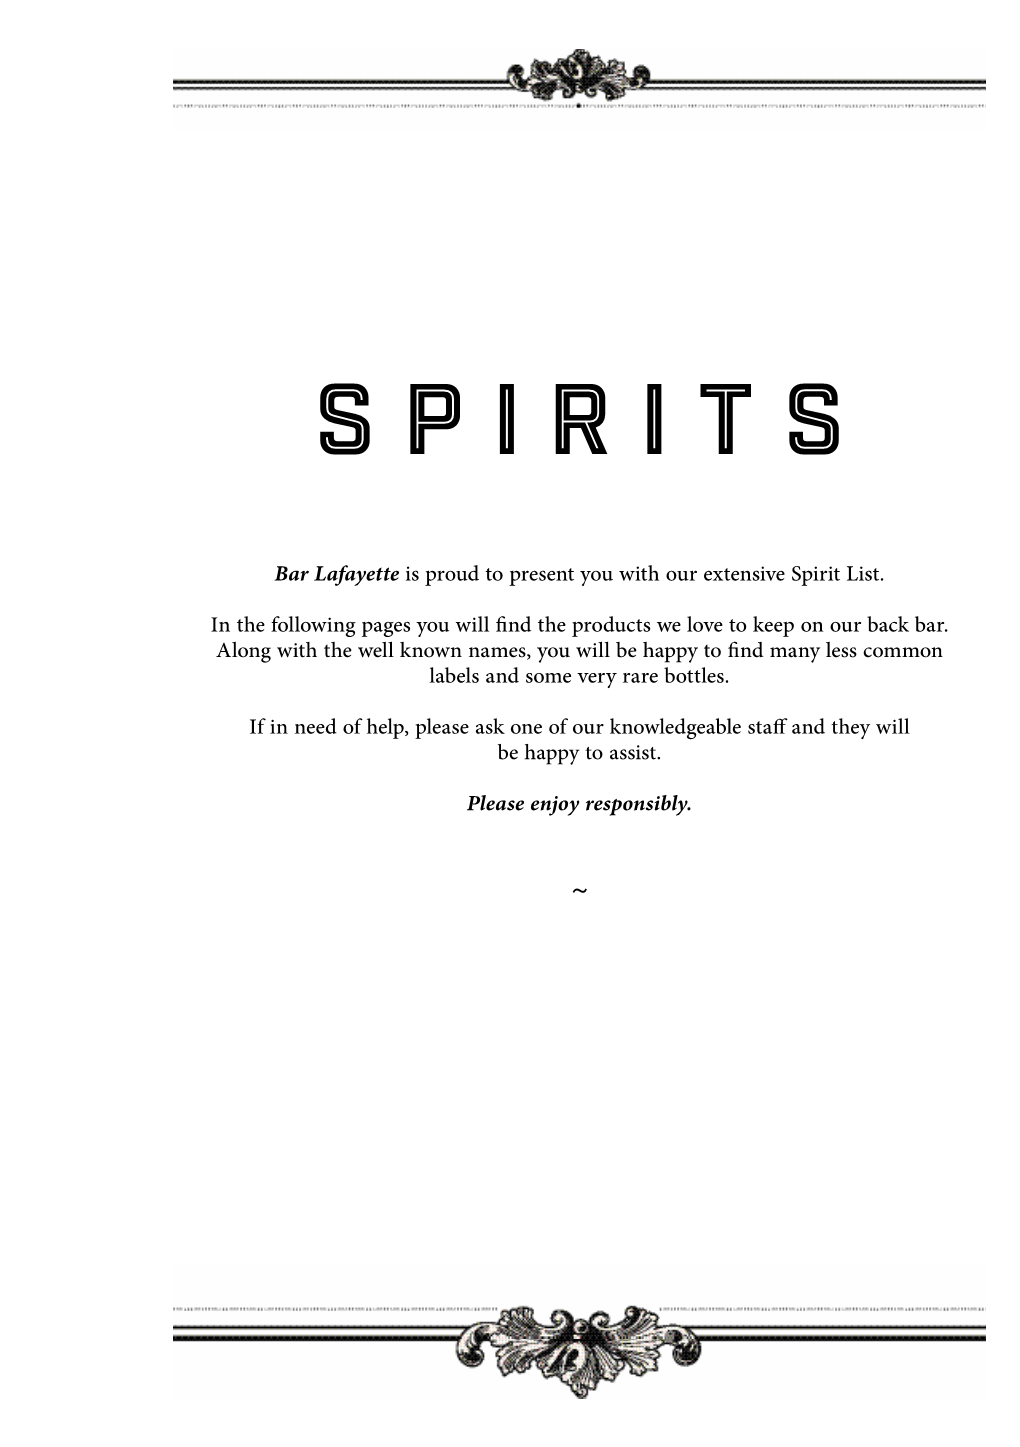 Bar Lafayette Is Proud to Present You with Our Extensive Spirit List. in the Following Pages You Will Find the Products We Love to Keep on Our Back Bar